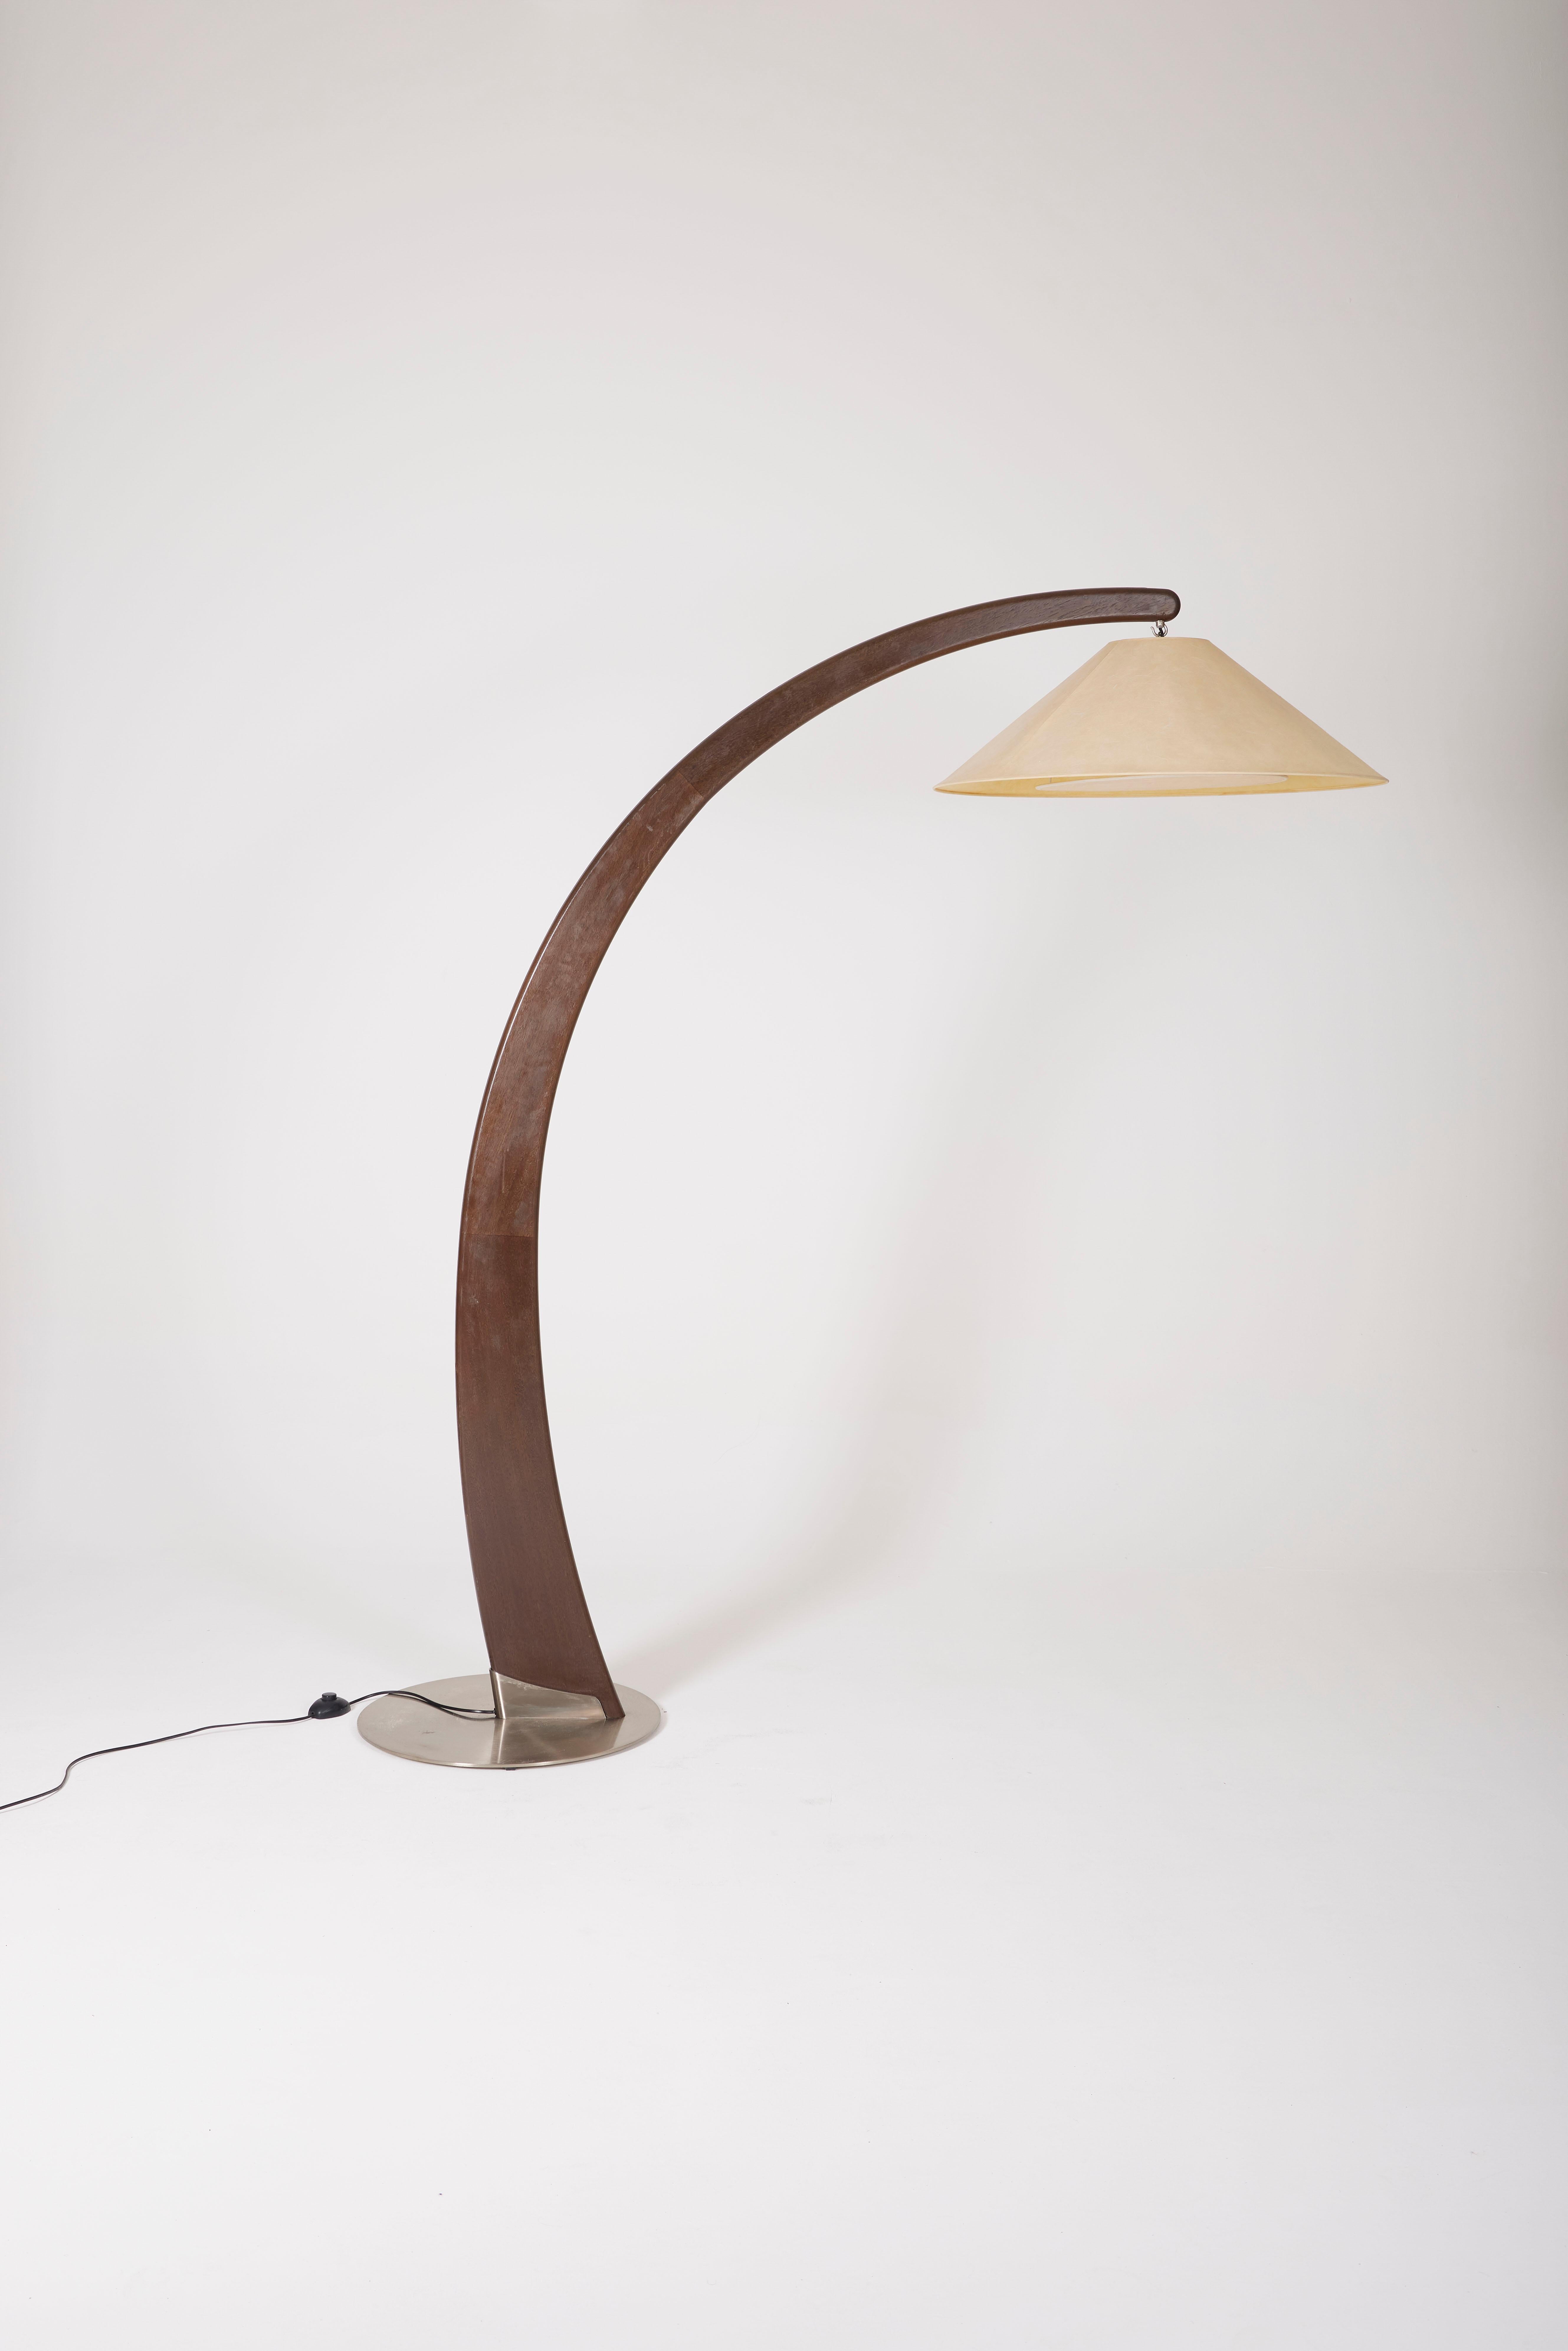 Arc floor lamp Luna by Italian designer Natuzzi Salotti (born in 1940), 1990s. The fabric lampshade is original. The floor lamp is composed of a solid walnut arc and a weighted stainless steel base. In very good condition.
LP2041